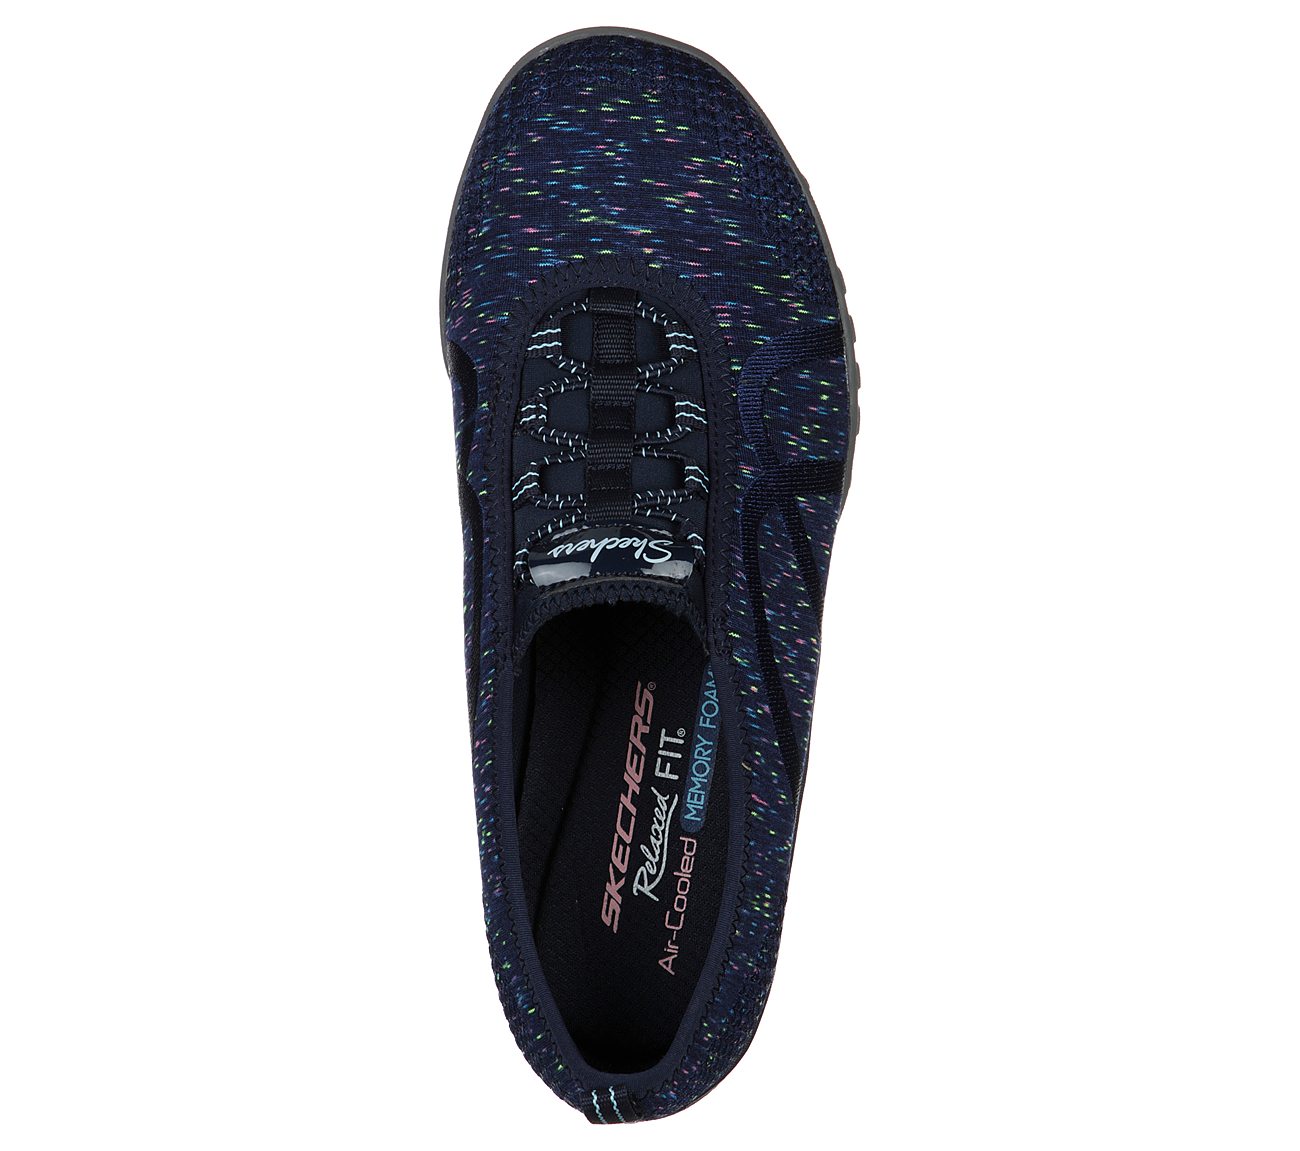 skechers relaxed fit air cooled memory foam womens